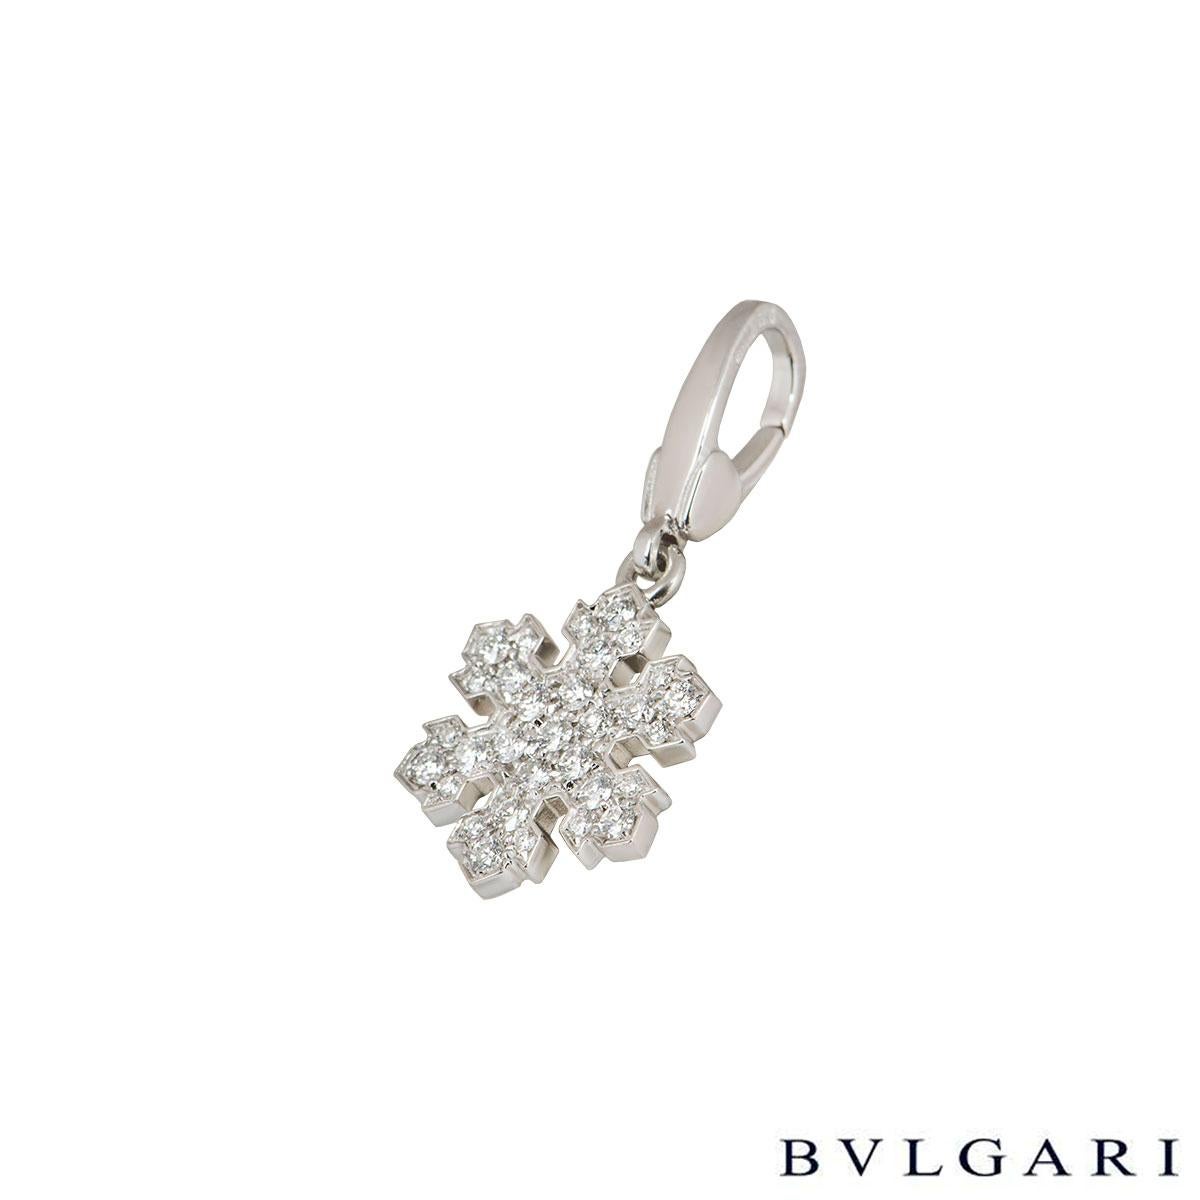 An 18k white gold diamond snowflake pendant by Bvlgari from the Fiocco De Neve collection. The pendant is a snowflake design and is pave set with 31 round brilliant cut diamonds with an approximate weight of 0.62ct. The pendant features a loop bail